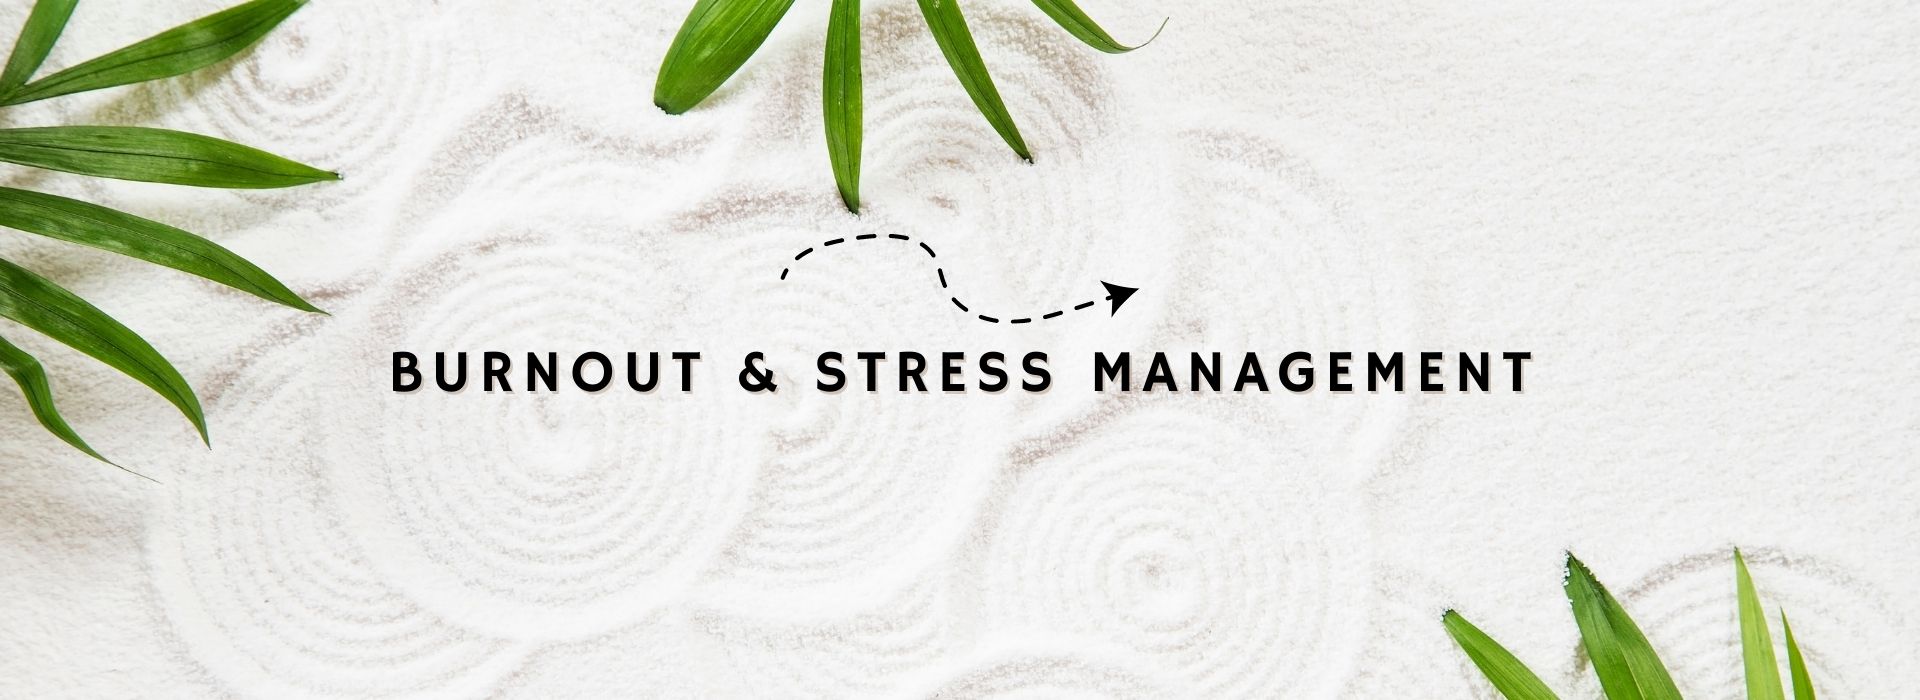 Zen sand and plants representing burnout and stress management workshops